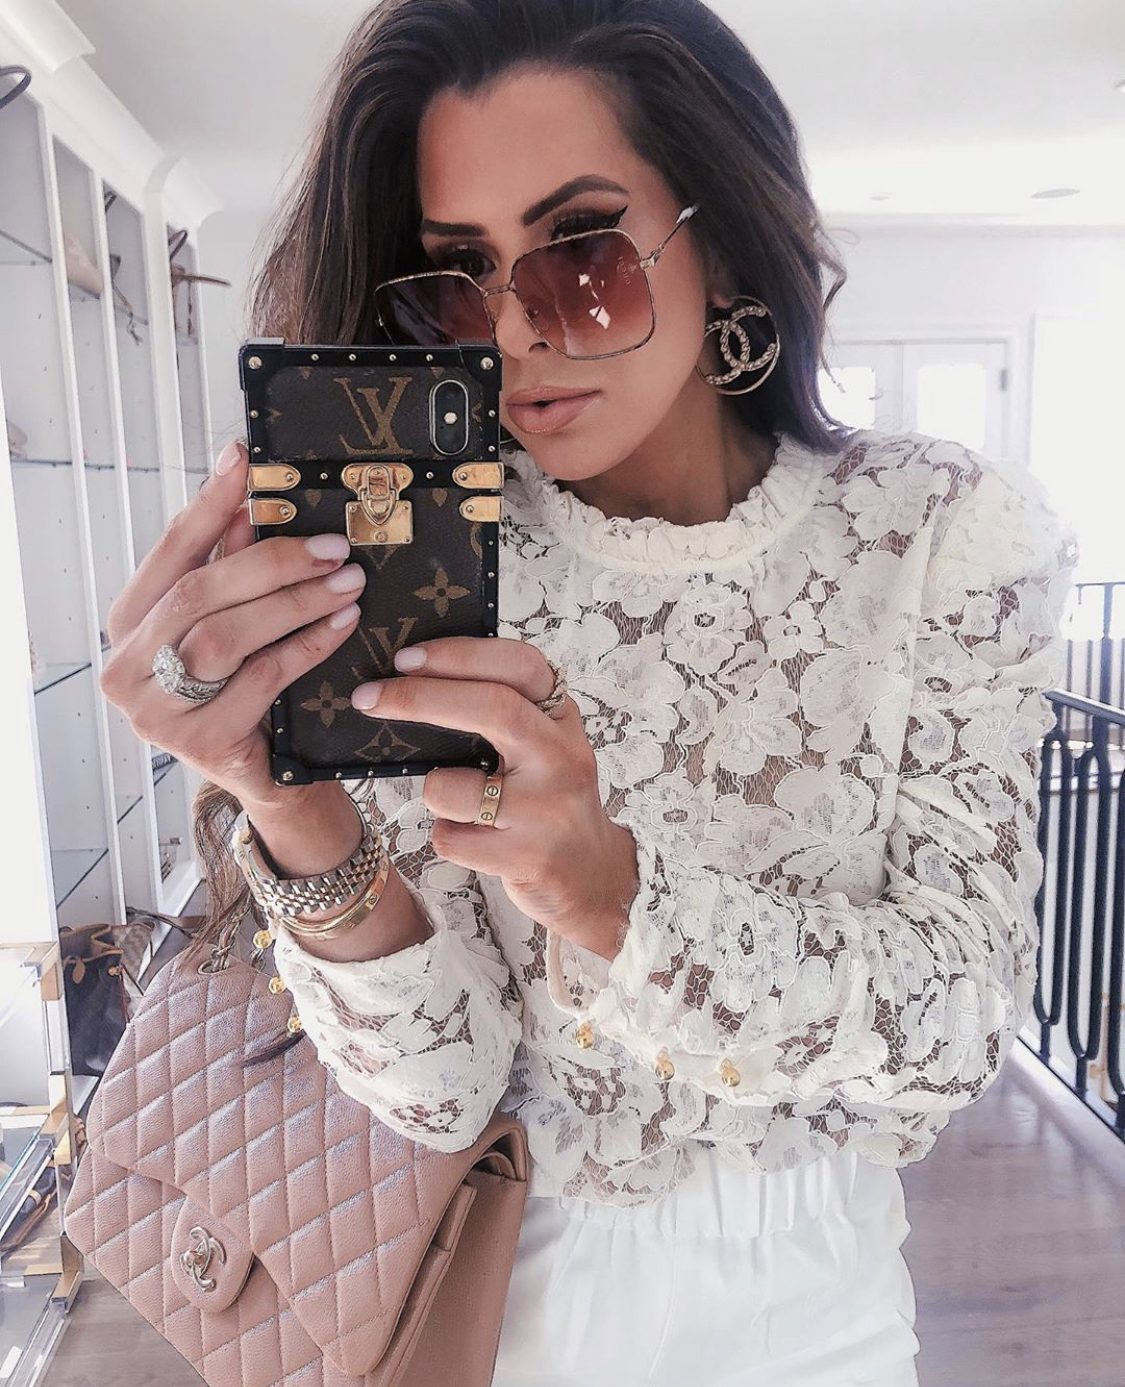 ShopBop Sale by popular US fashion blog, The Sweetest Thing: image of a woman wearing a ShopBop WAYF Emma Puff Sleeve Lace Top.